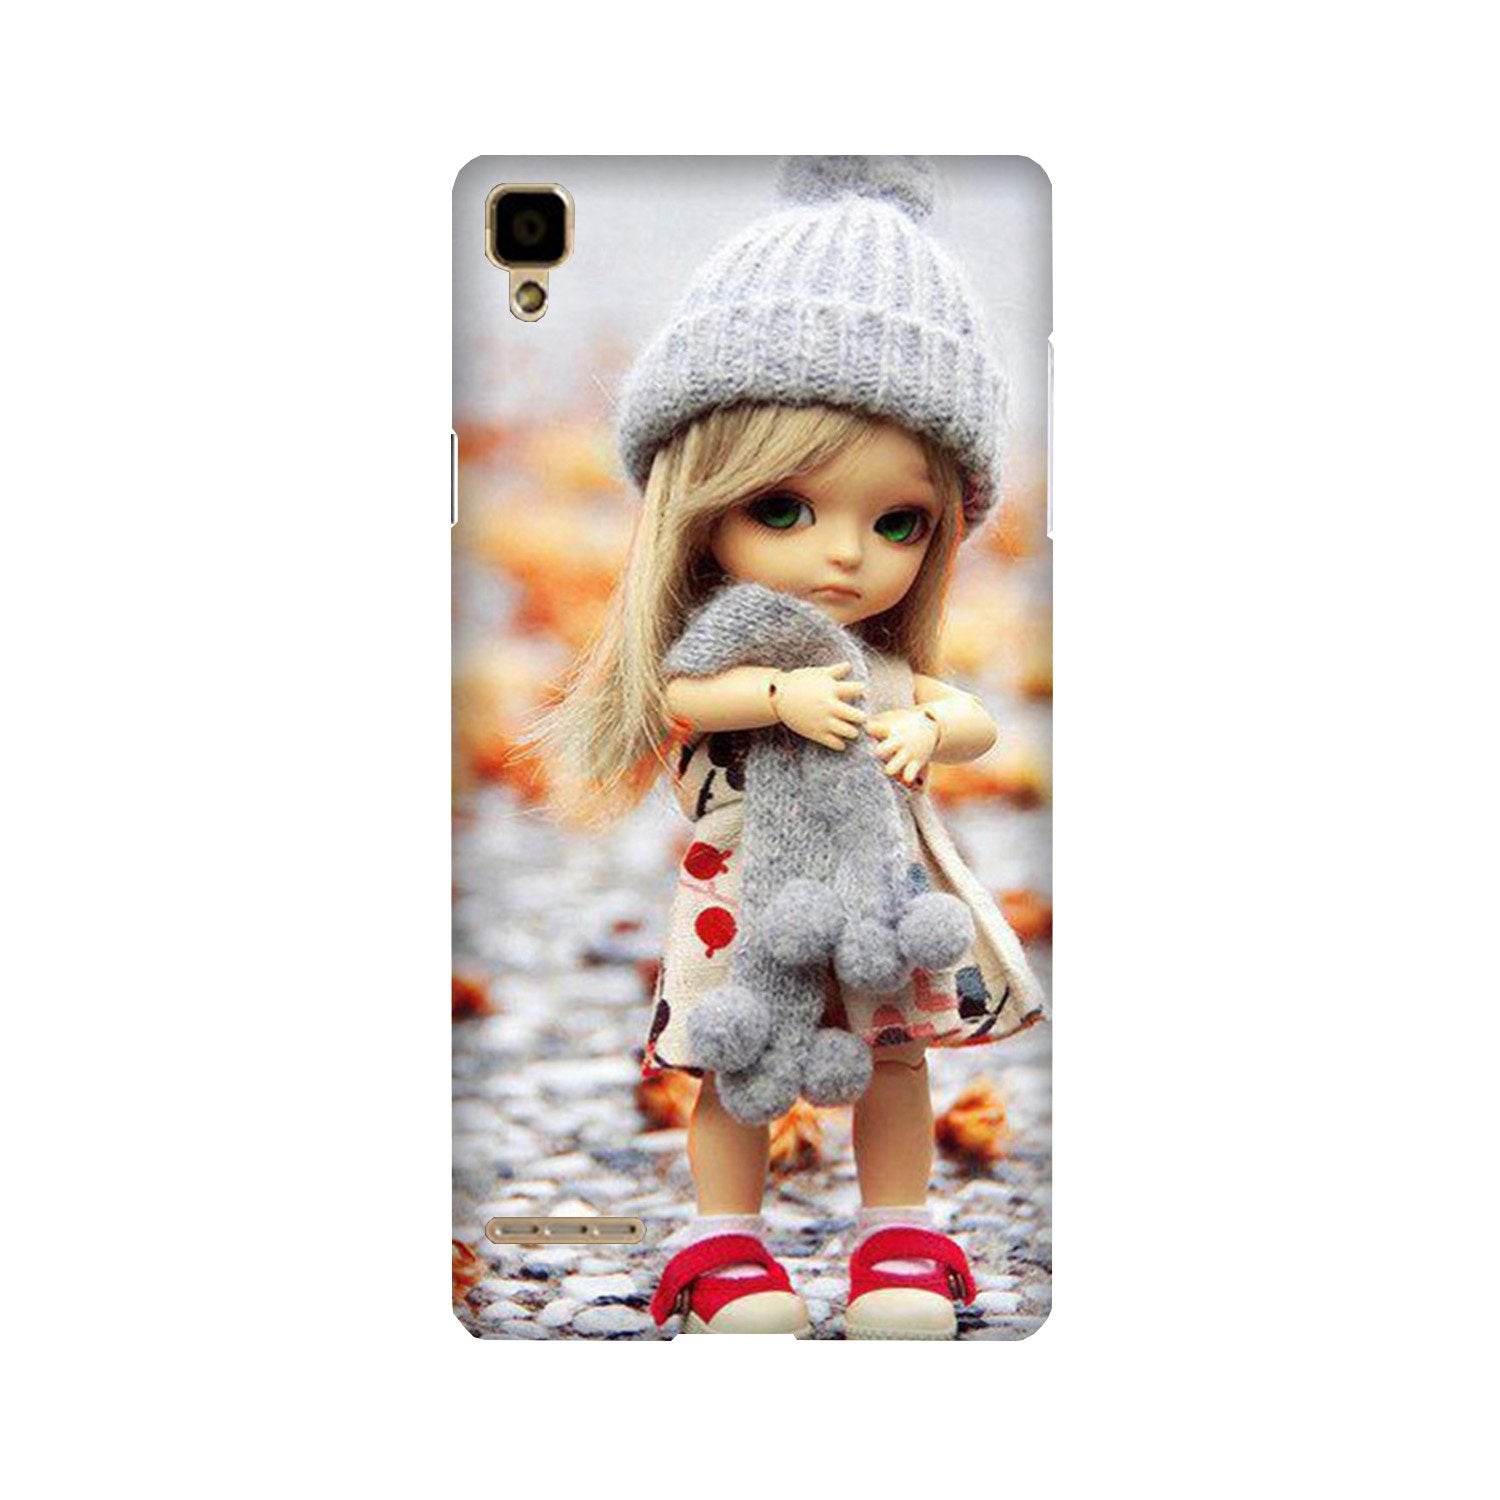 Cute Doll Case for Oppo F1